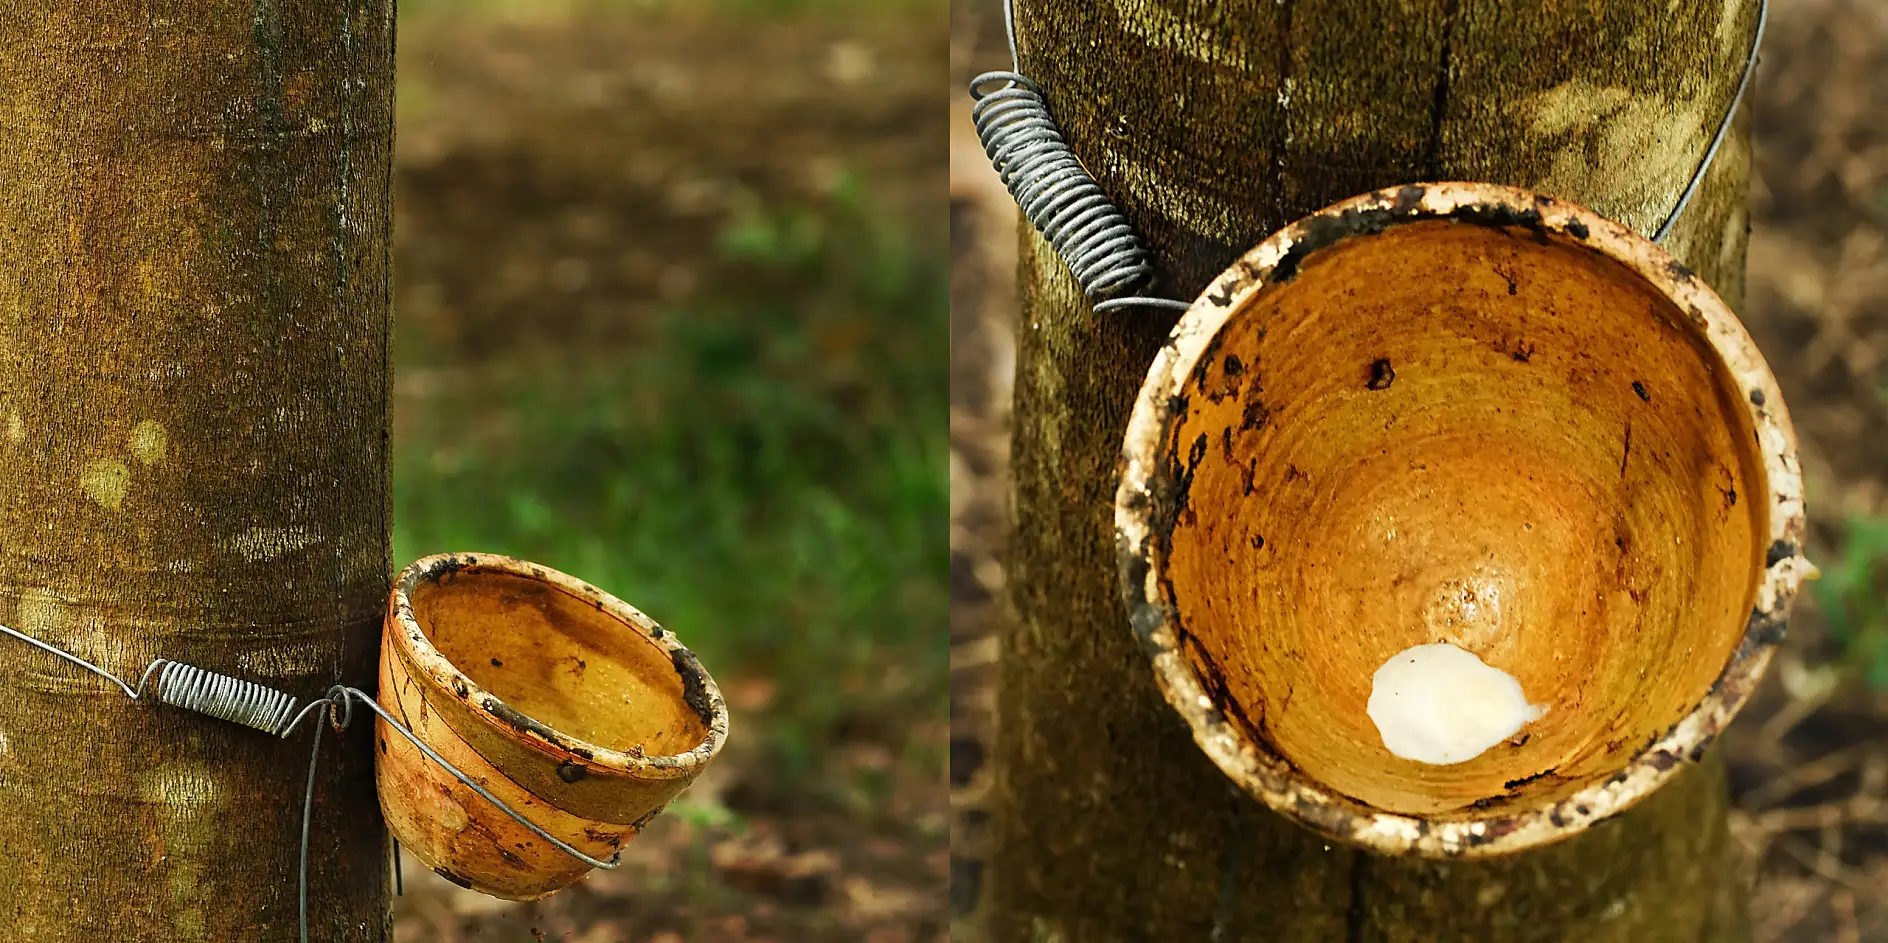 Latex milk is directly gained from the rubber tree